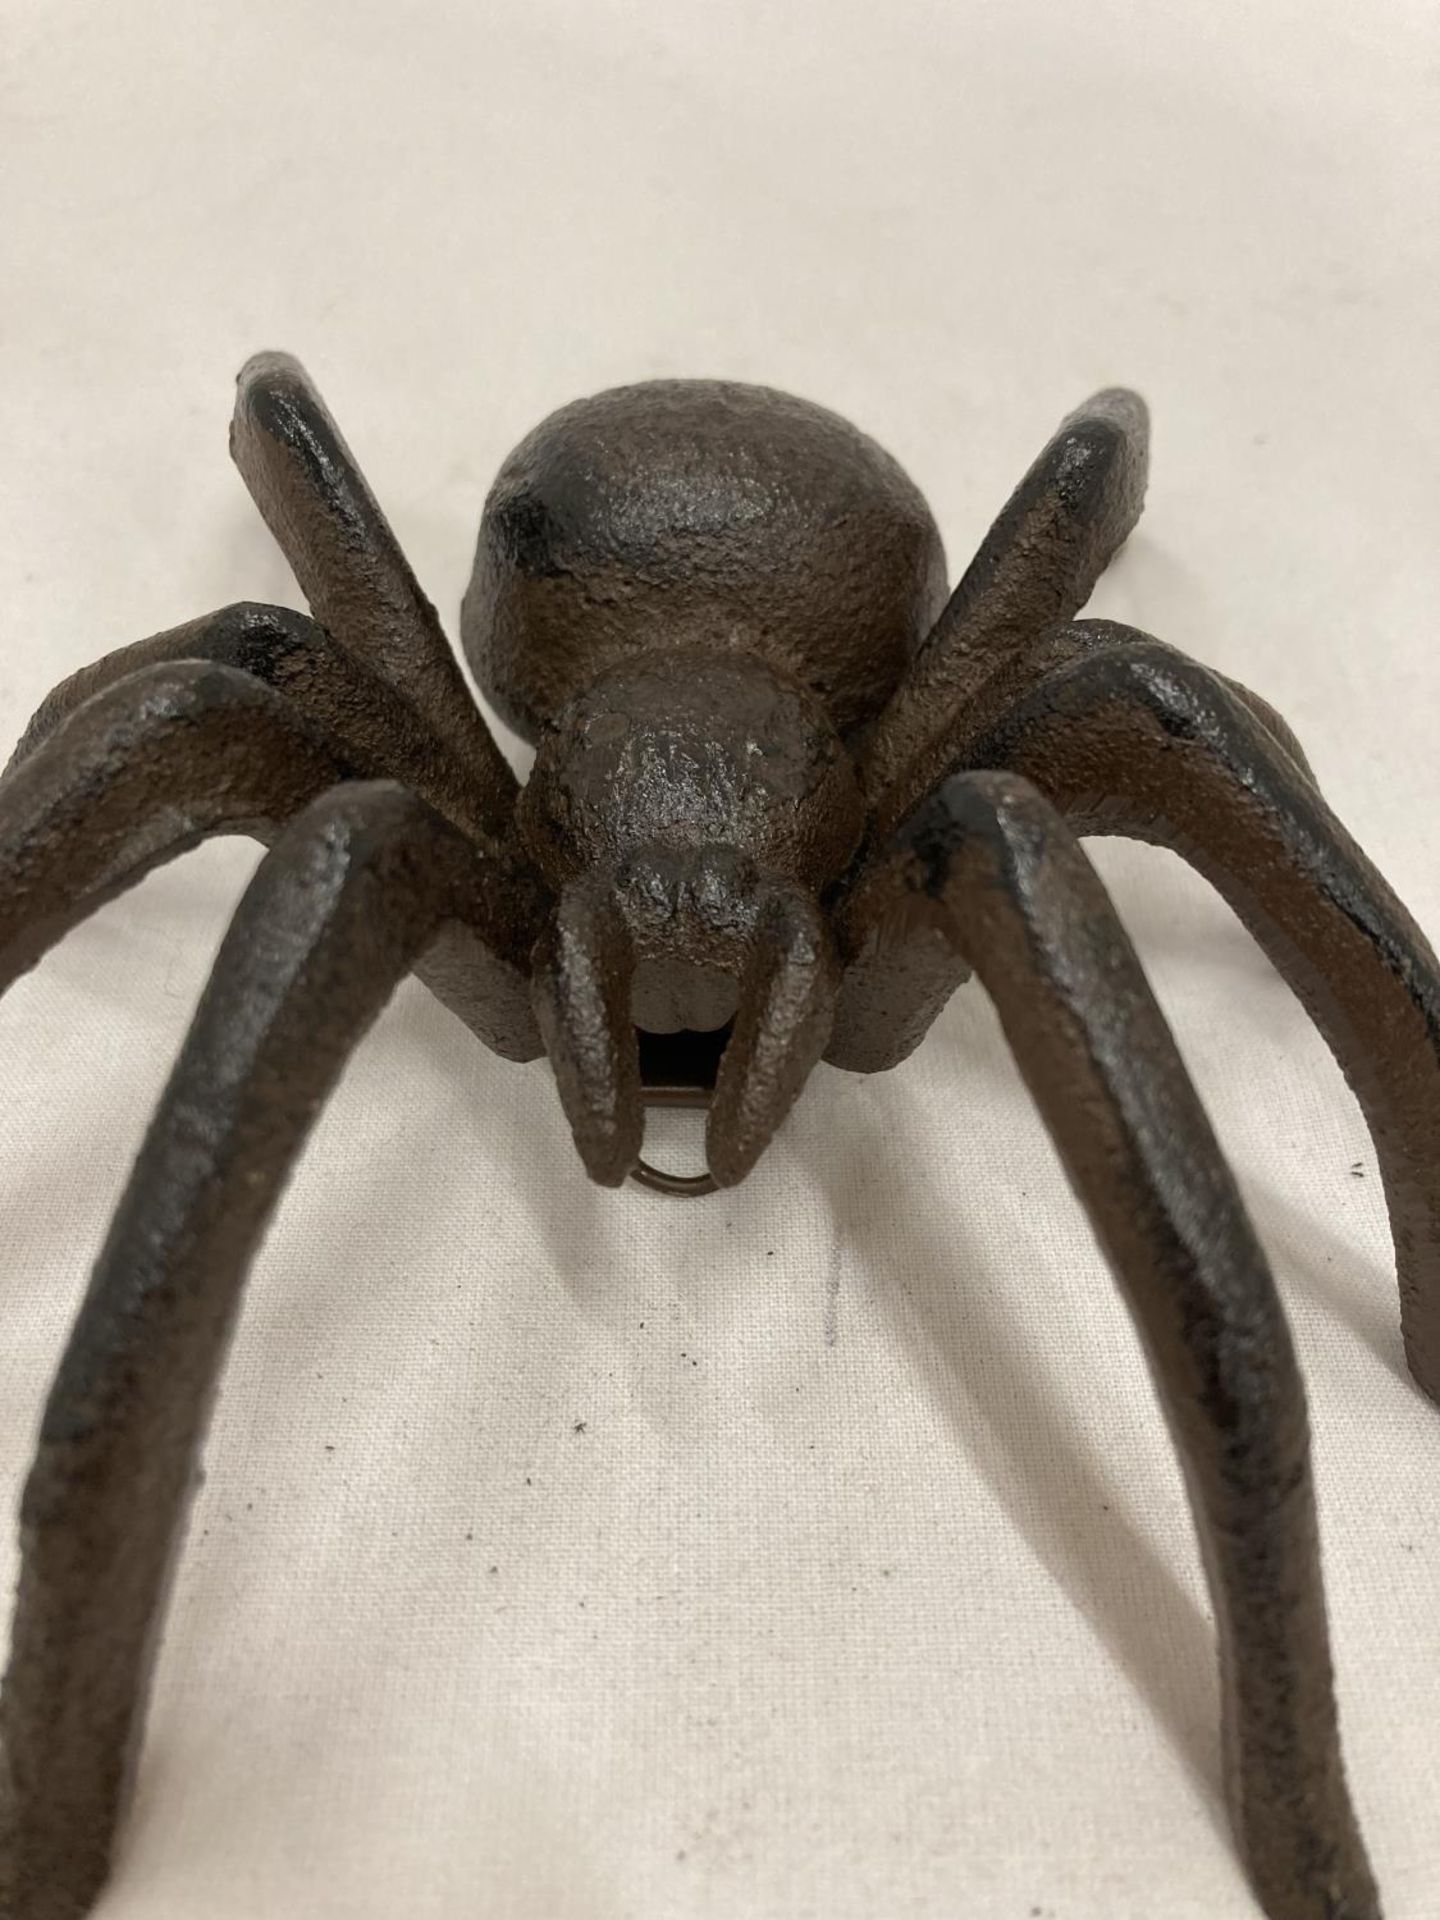 A CAST METAL MODEL OF A SPIDER - Image 2 of 5